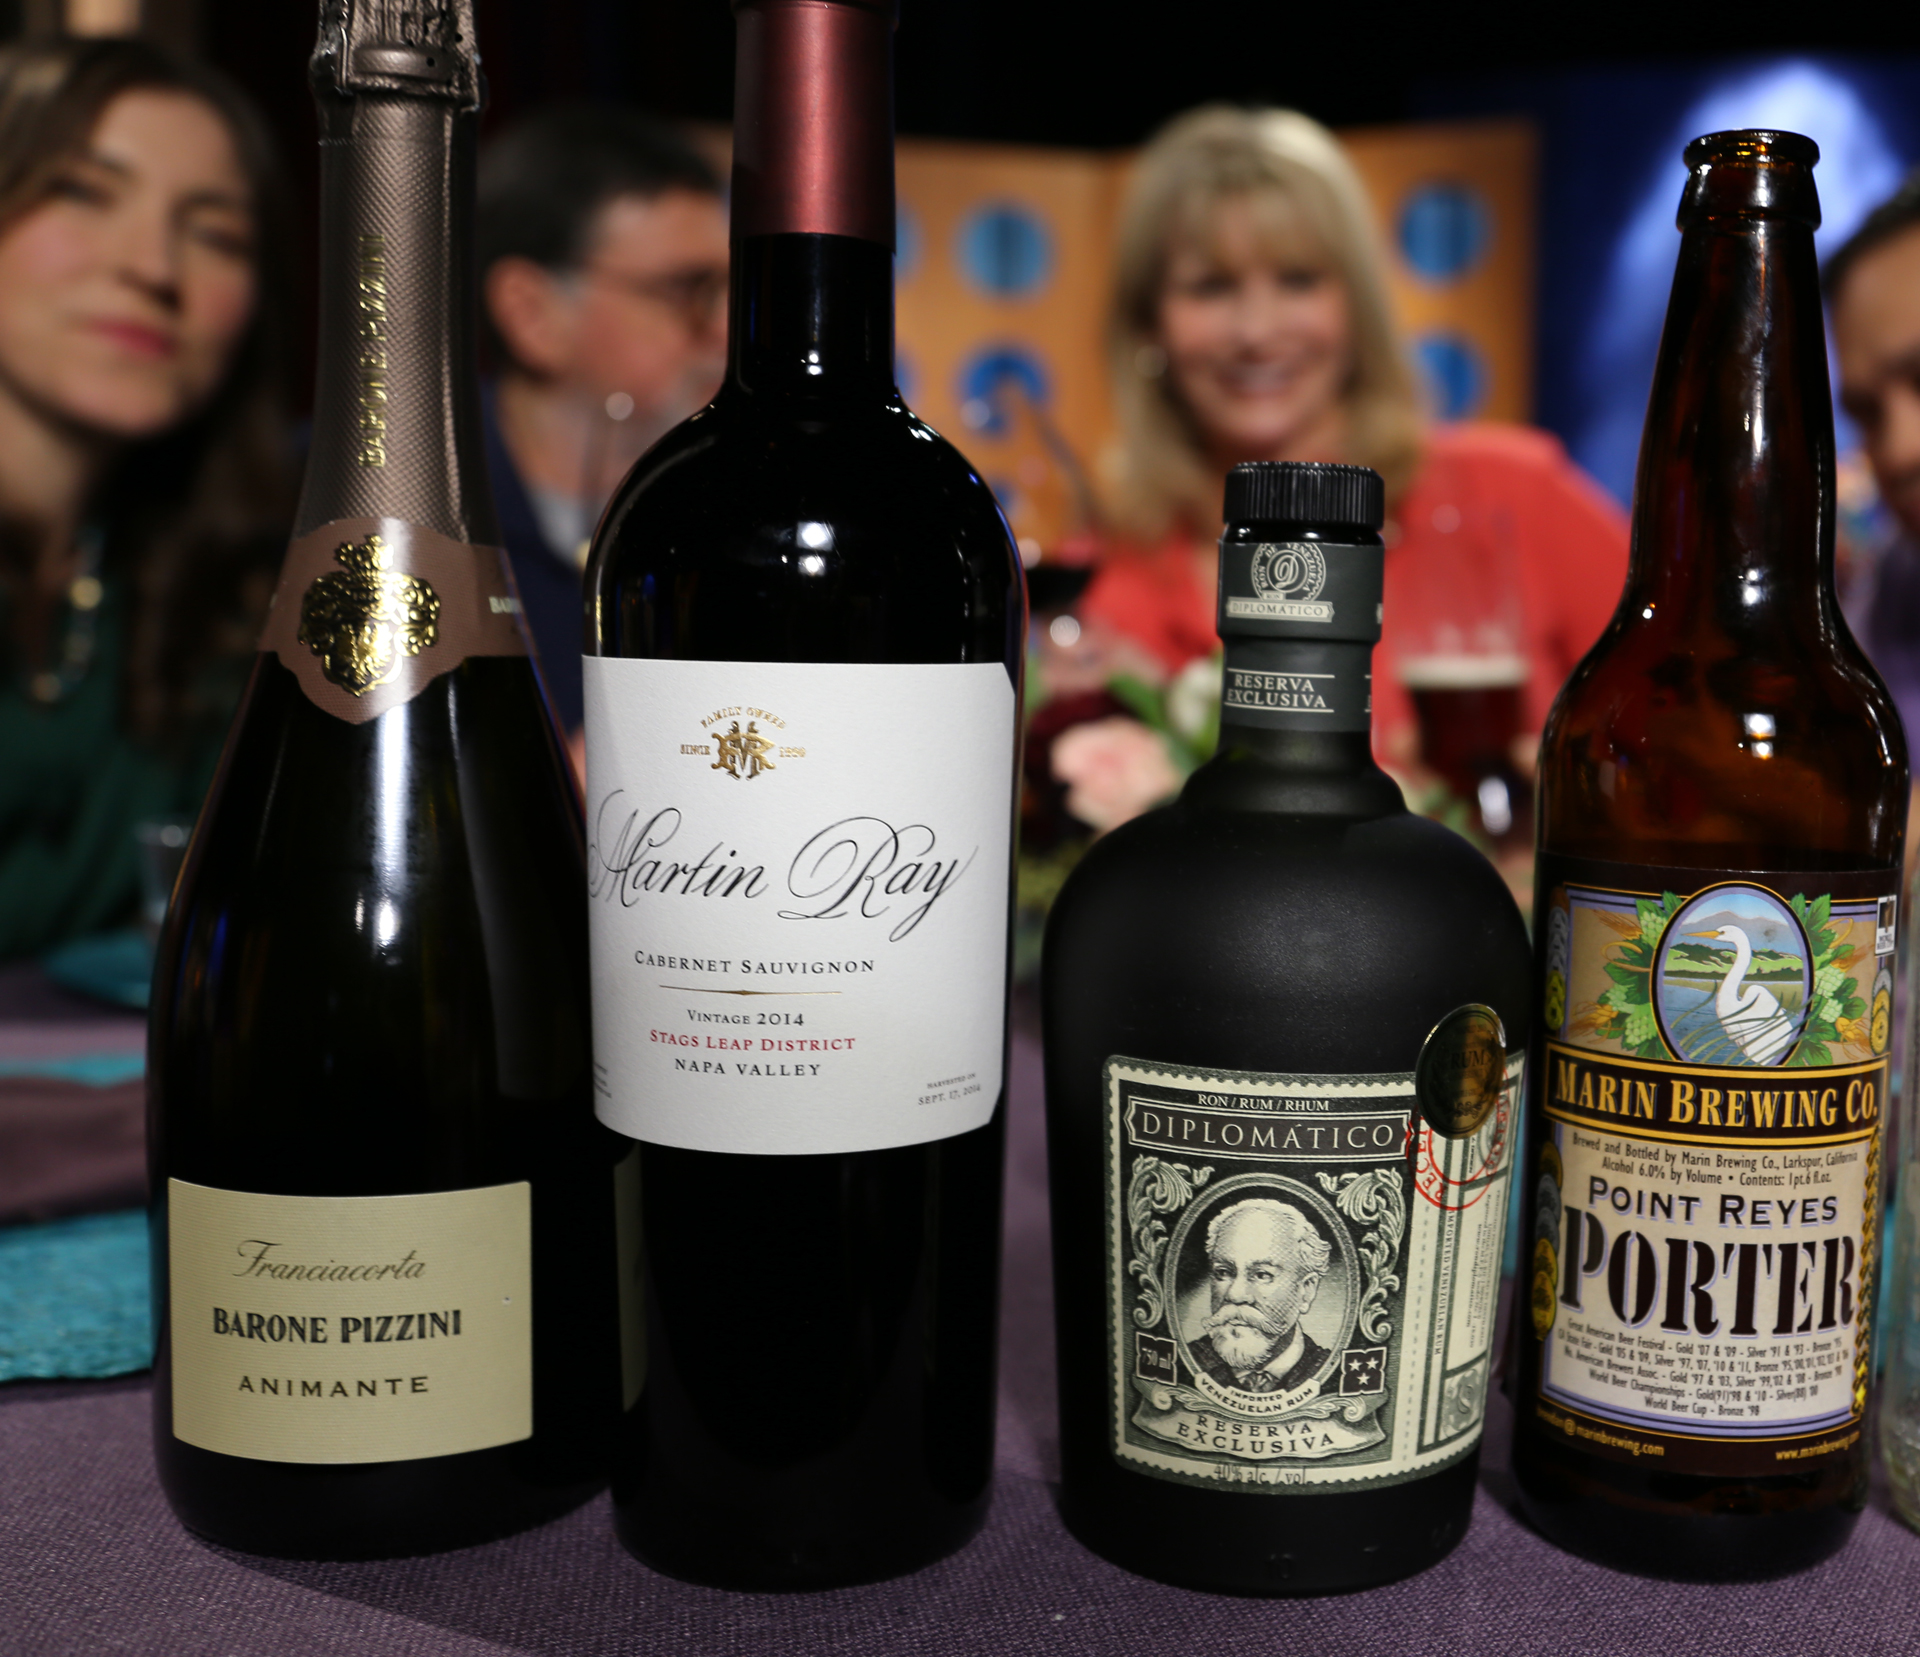 Wine, beer and spirits that guests drank on the set of season 12 episode 4.